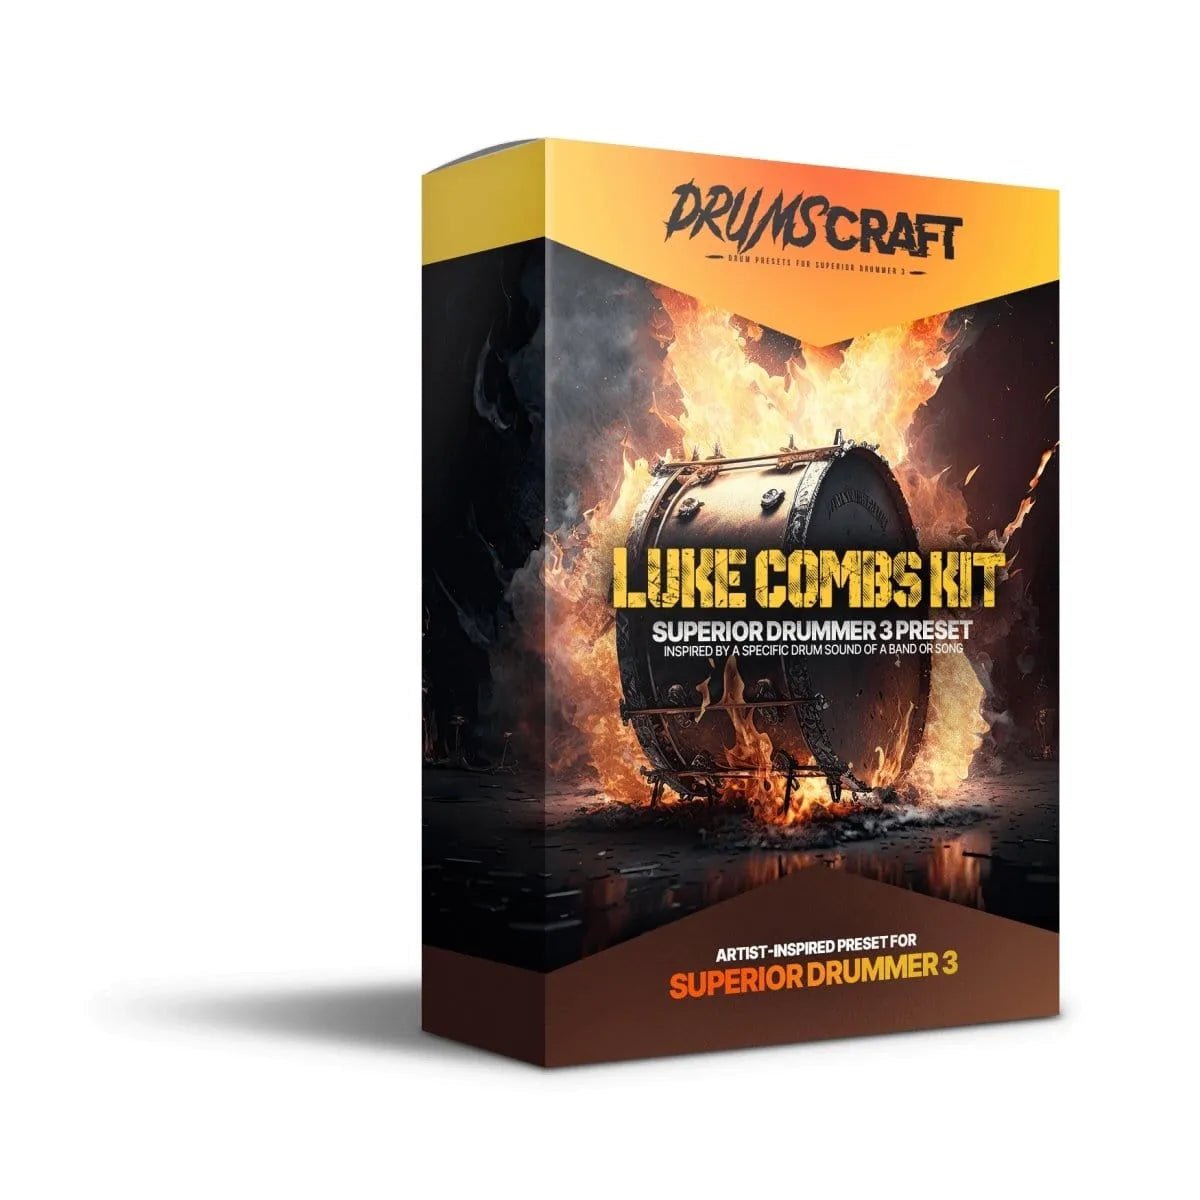 Luke Combs Kit - Superior Drummer 3 Presets by Develop Device